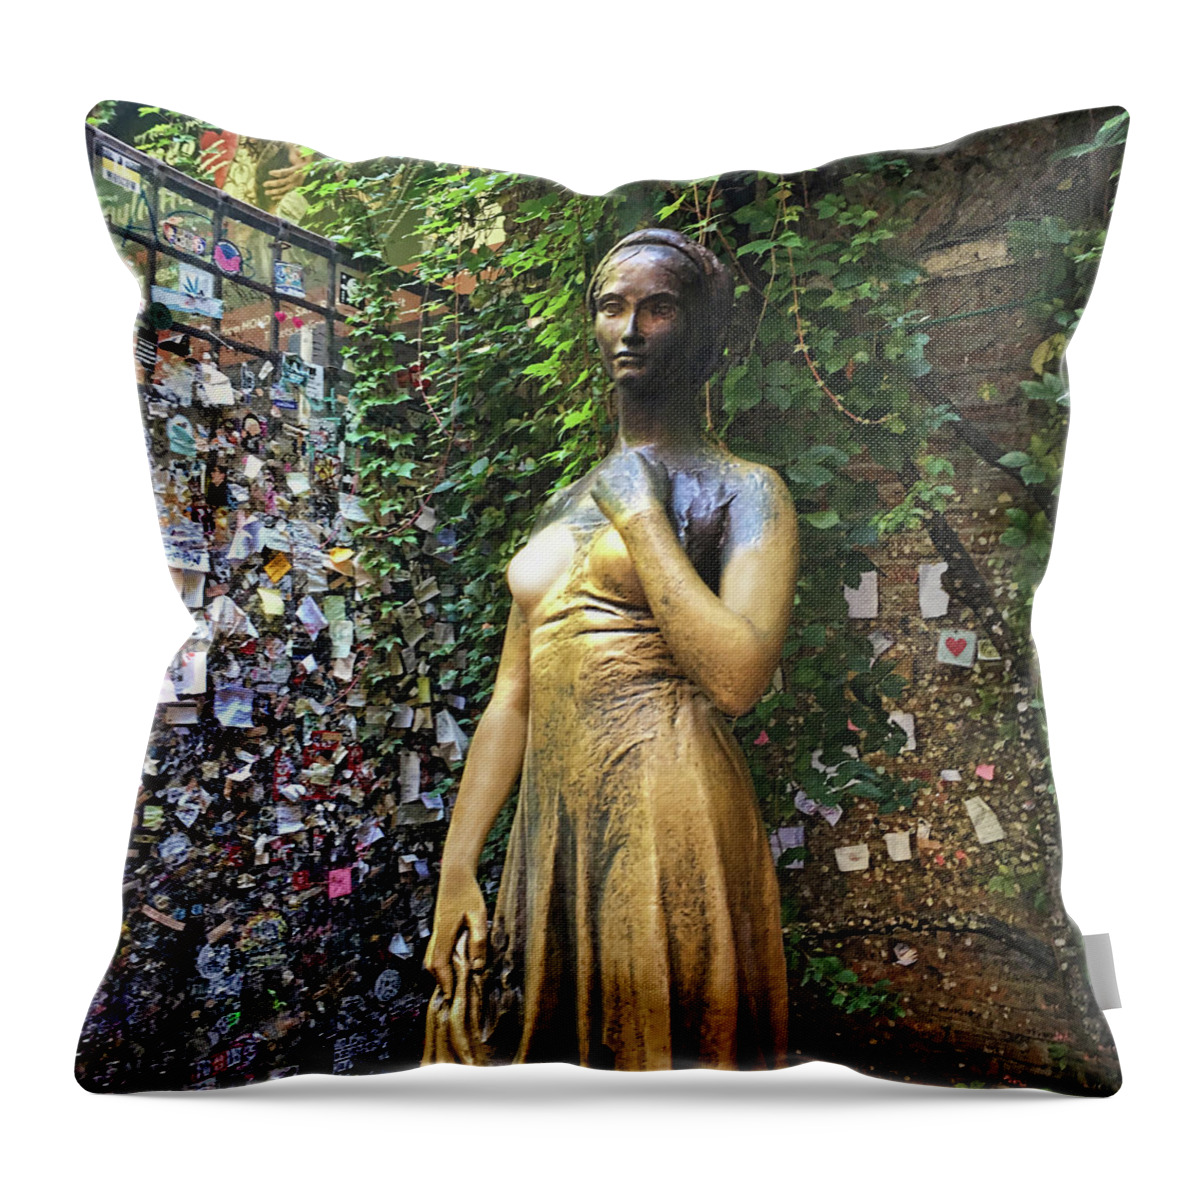 Romeo And Juliet Throw Pillow featuring the photograph Juliet Statue Verona, Italy by Deborah League